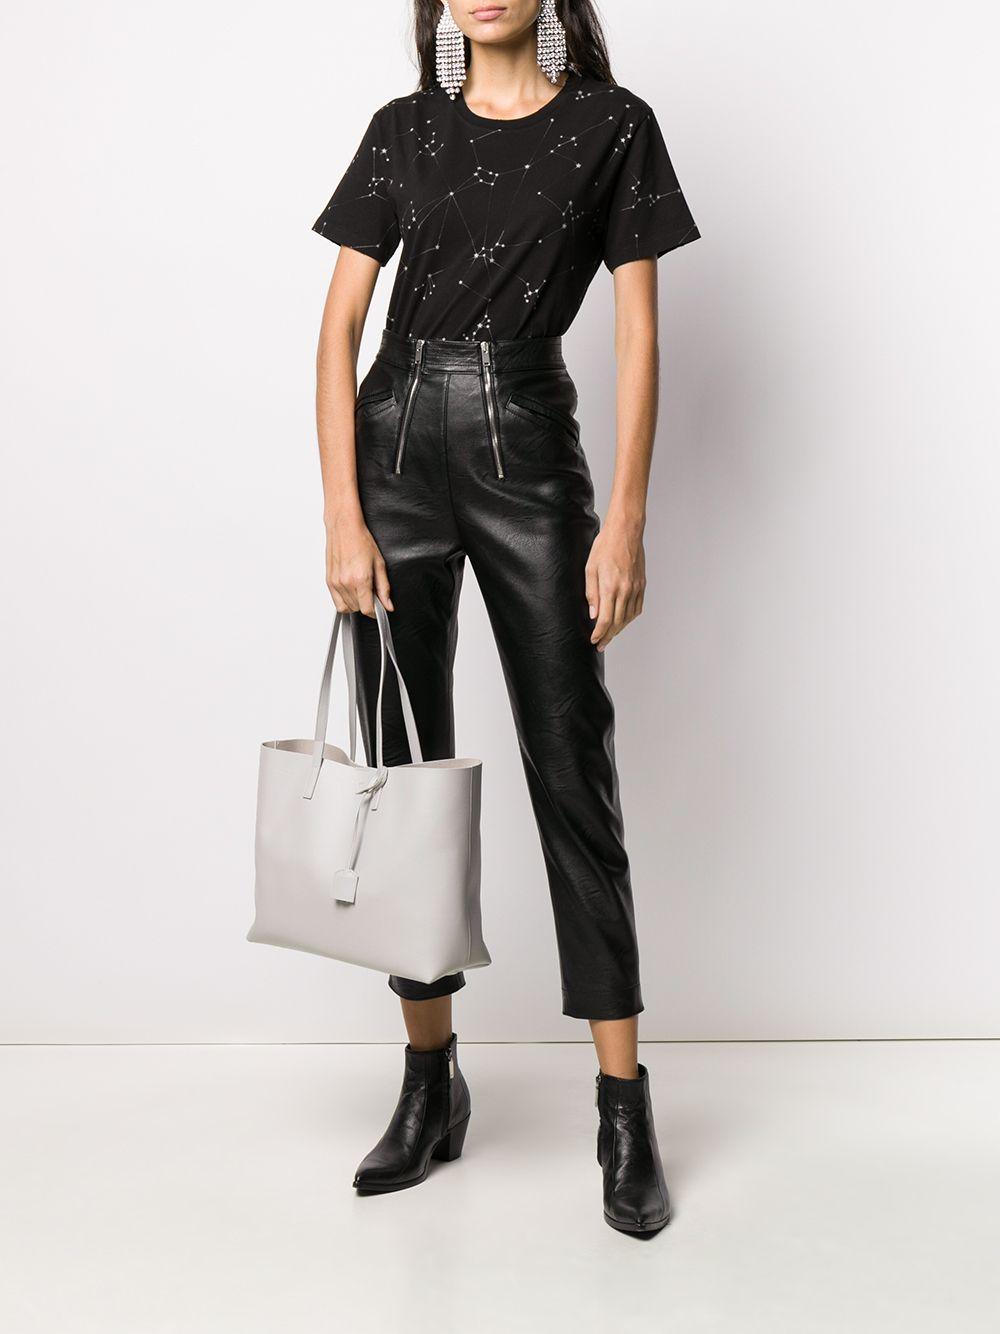 Saint Laurent Leather Shopping Bag in Gray | Lyst